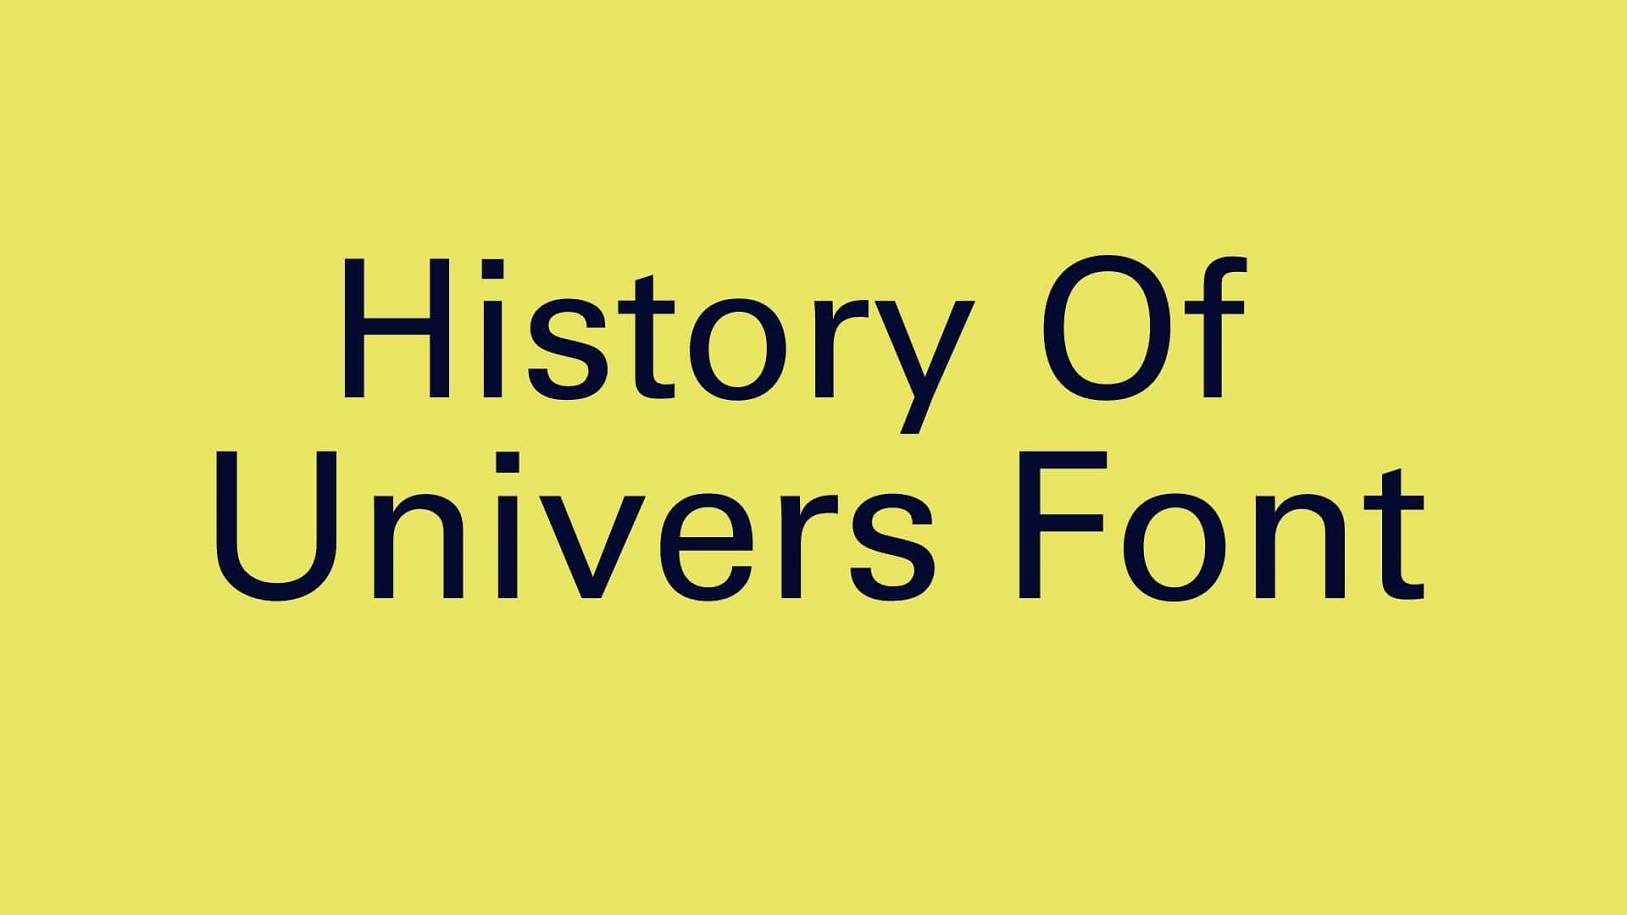 History of Univers Font